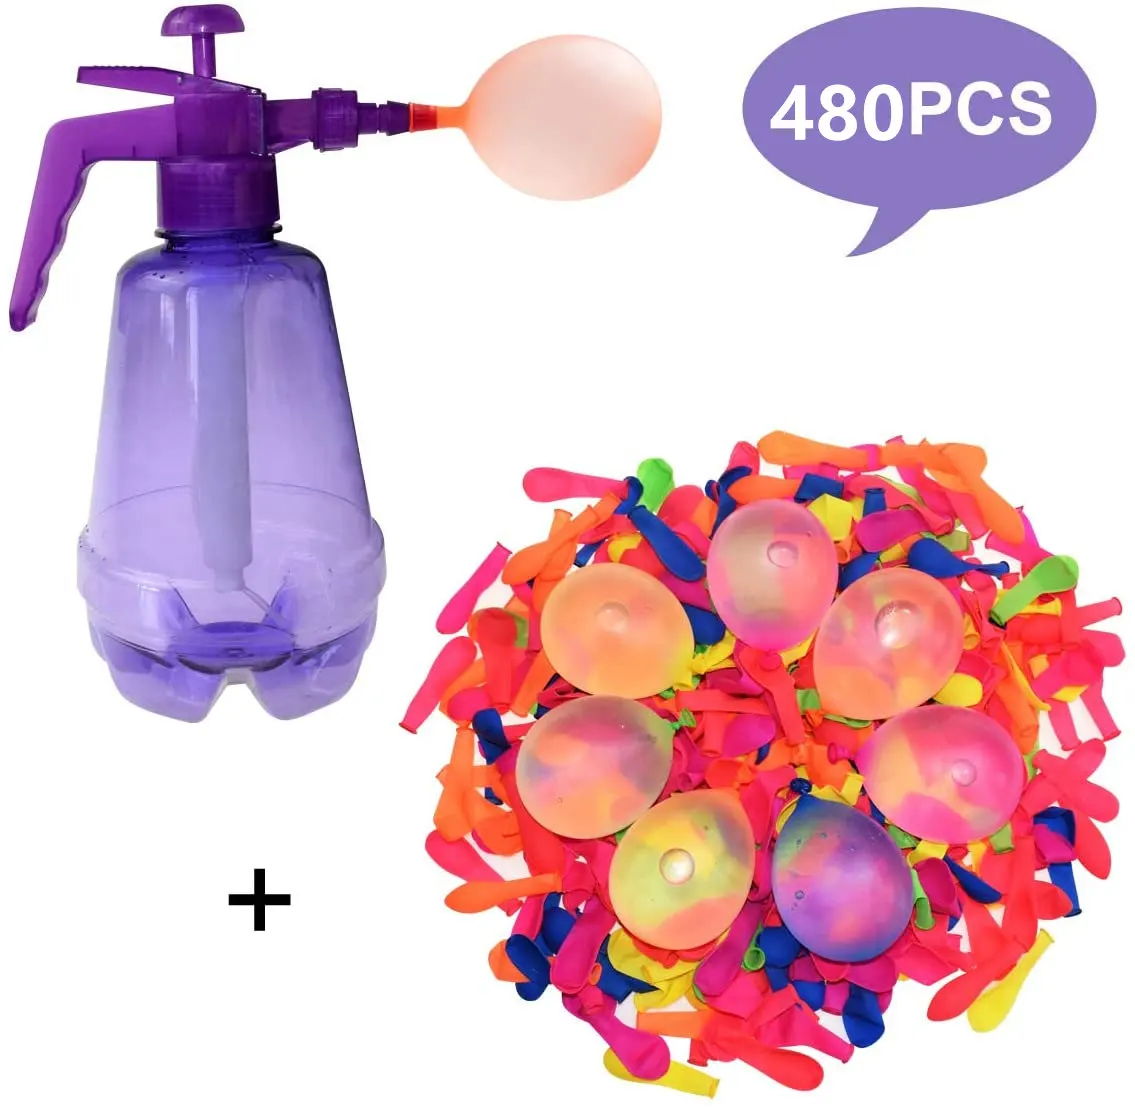  balloon pumping station with 480 water balloons and water pump inflation ball for kids thumb200